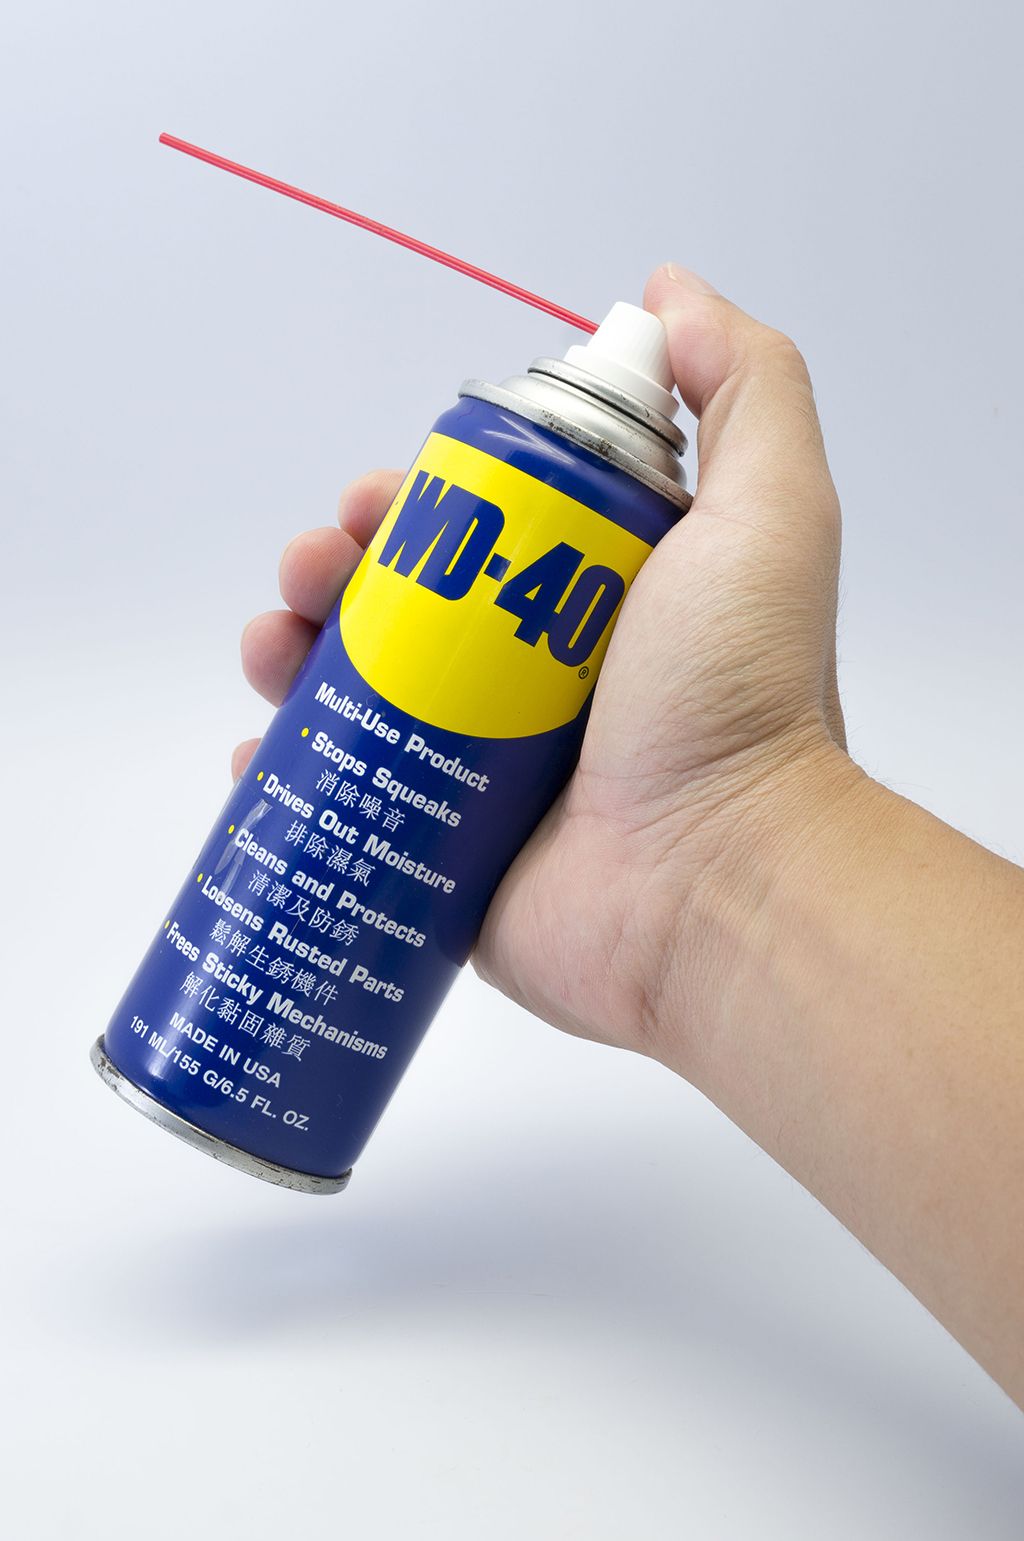 WD 40 масло, над 40